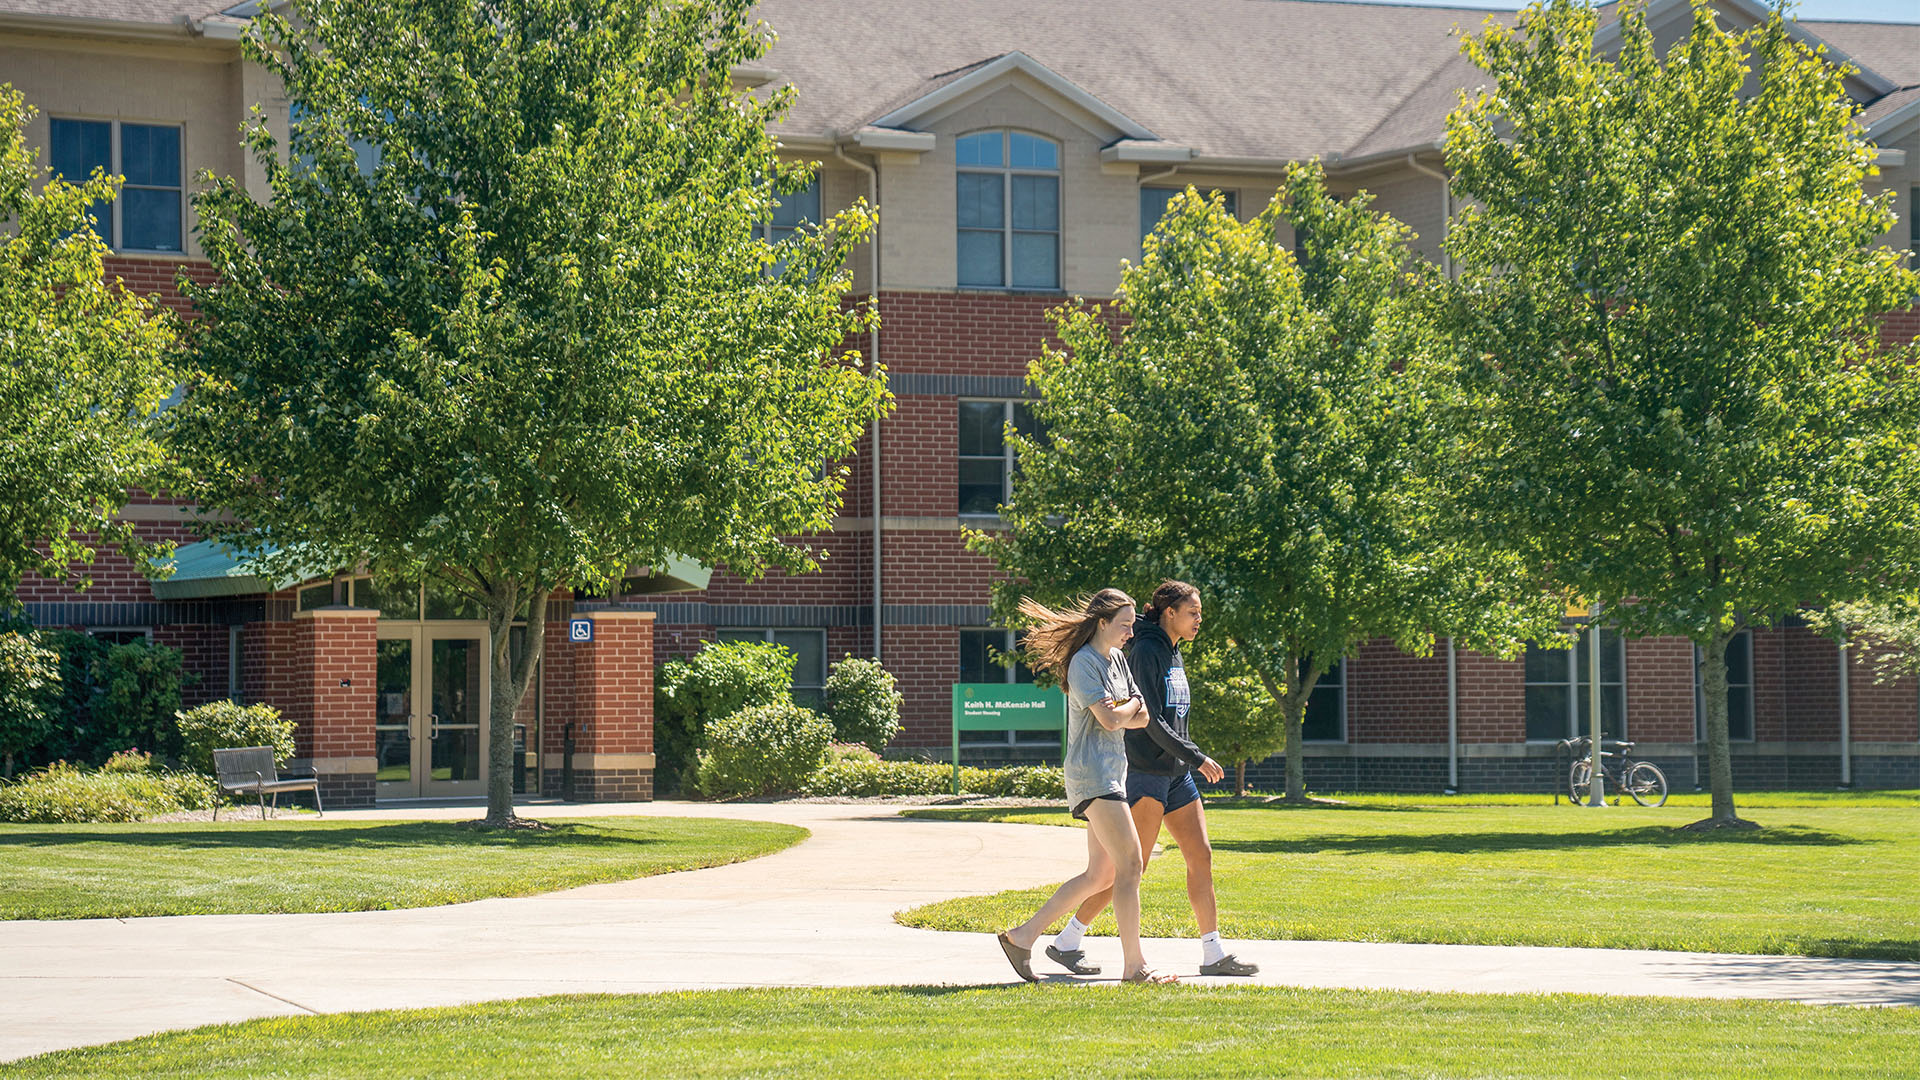 SMC offers three residence halls with apartment-style living.